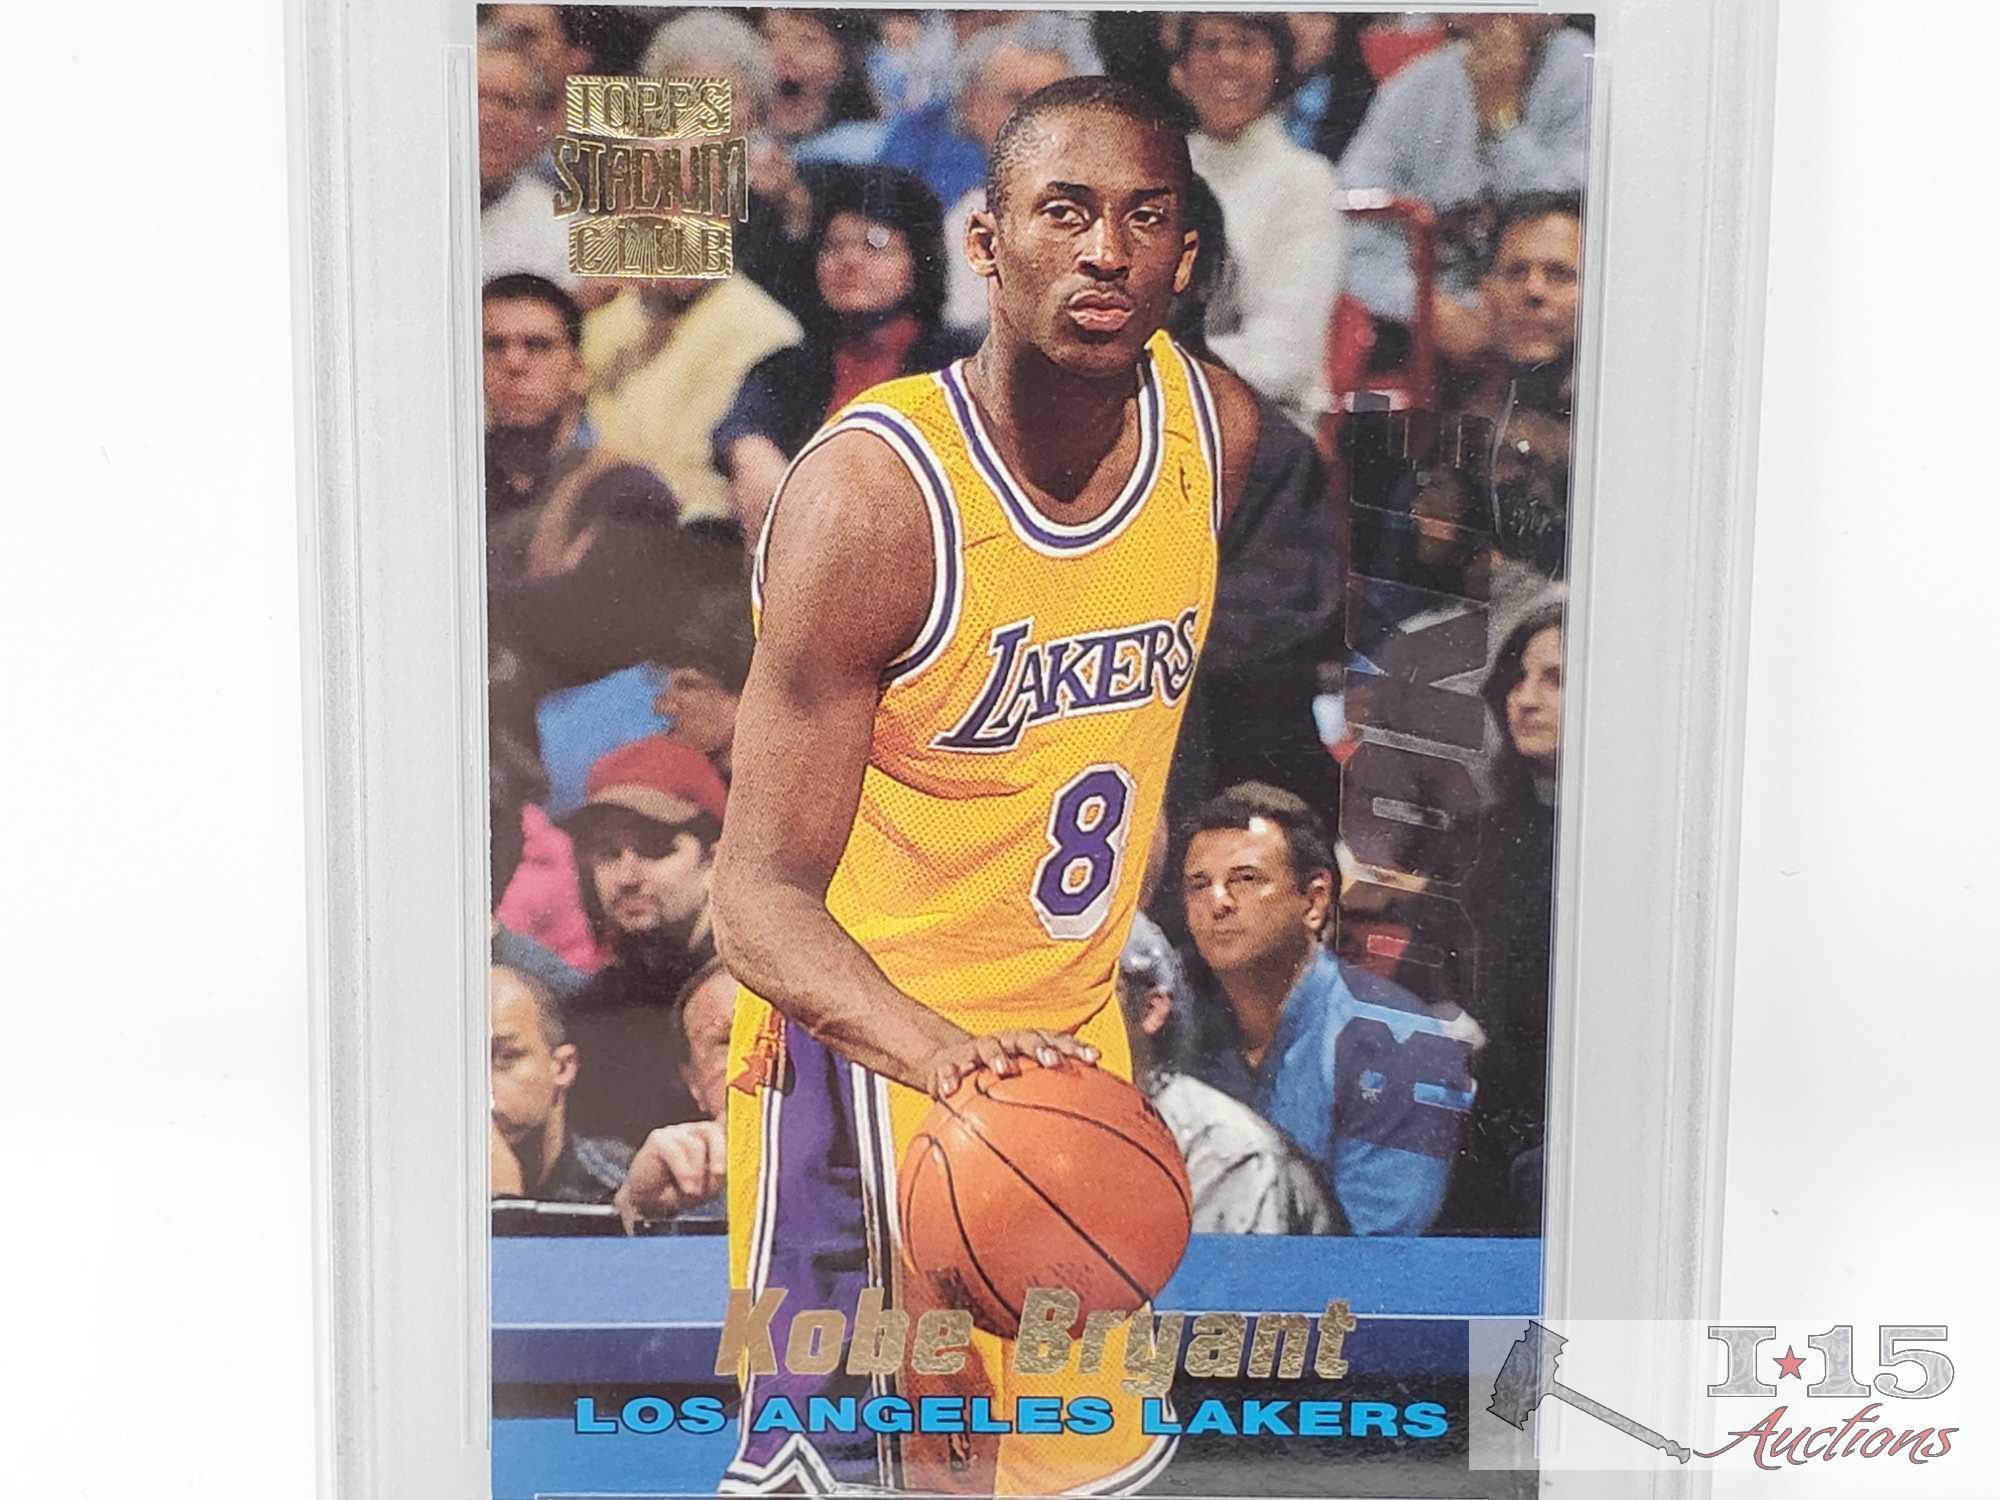 1996-97 Topps Stadium Club and Upper Deck SP Pro Graded Kobe Bryant Rookie Cards